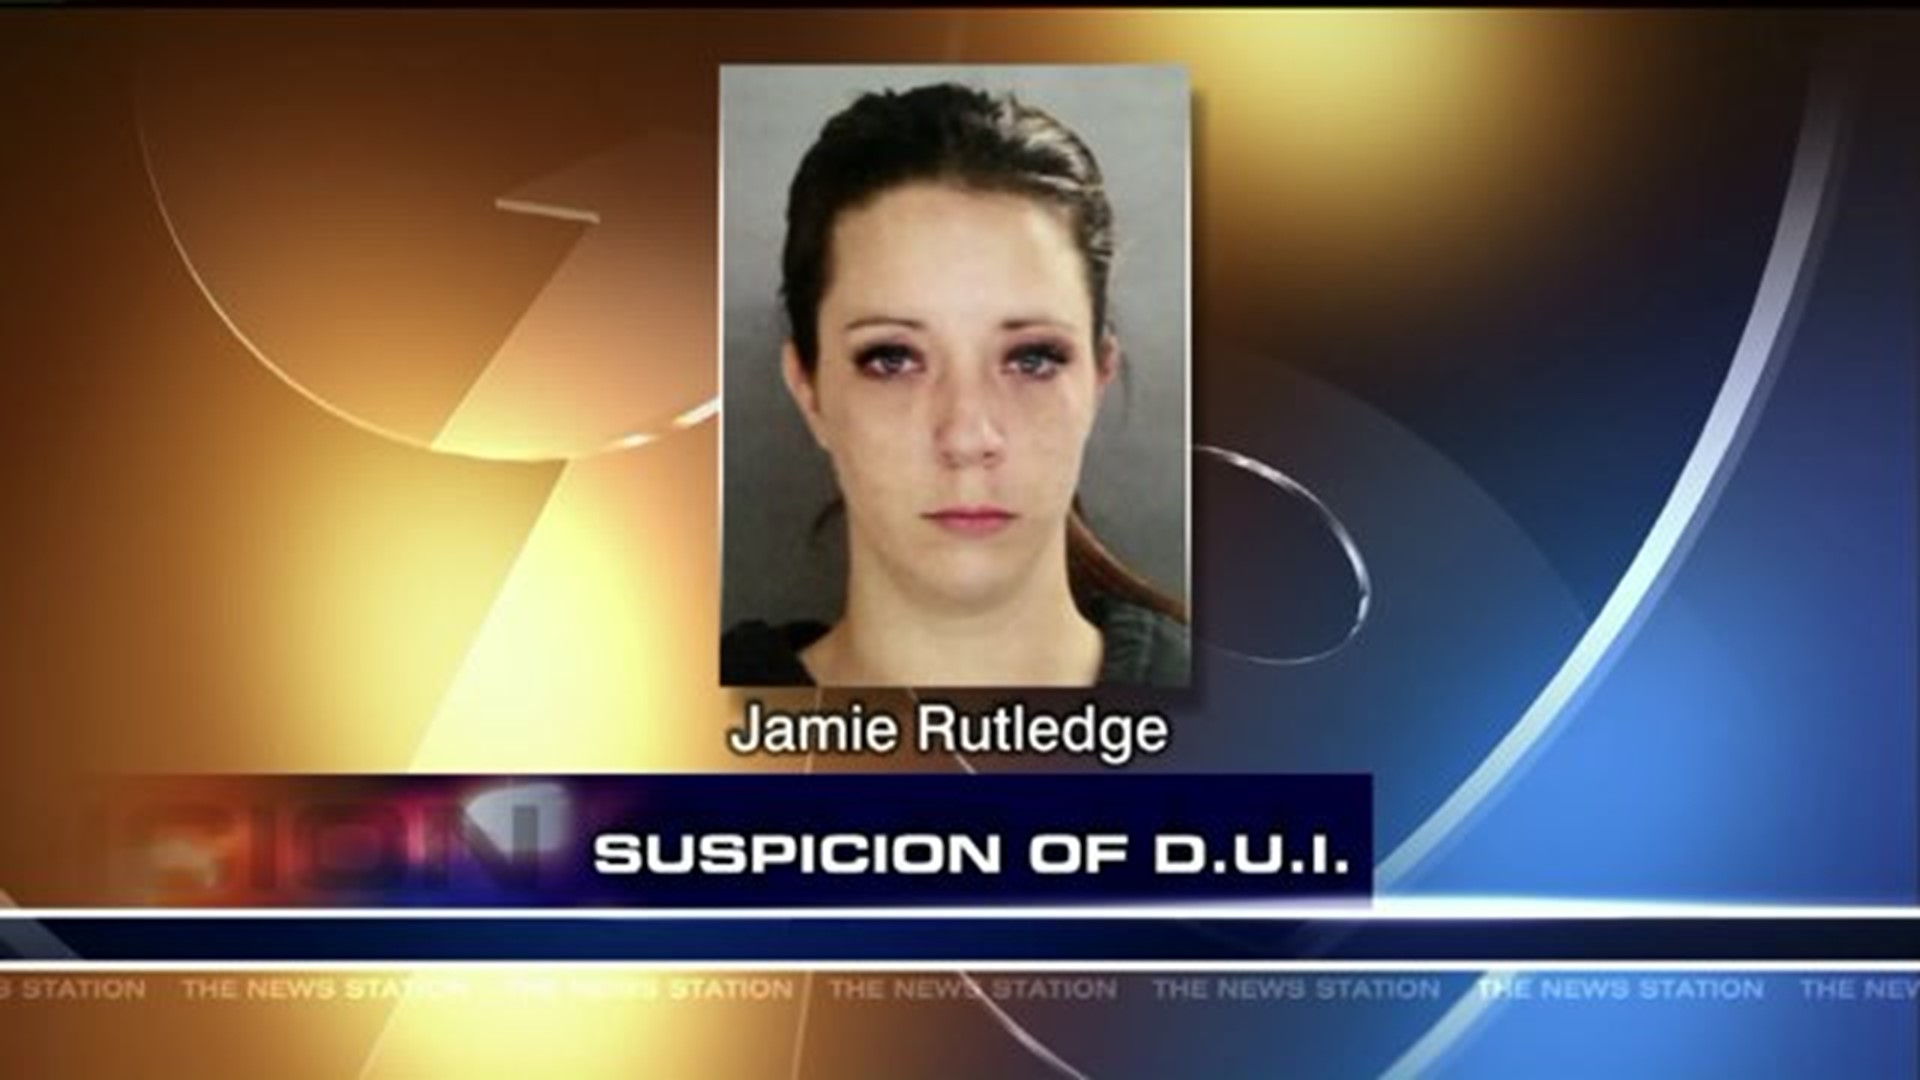 DUI History for Driver Suspected of Hitting Girl